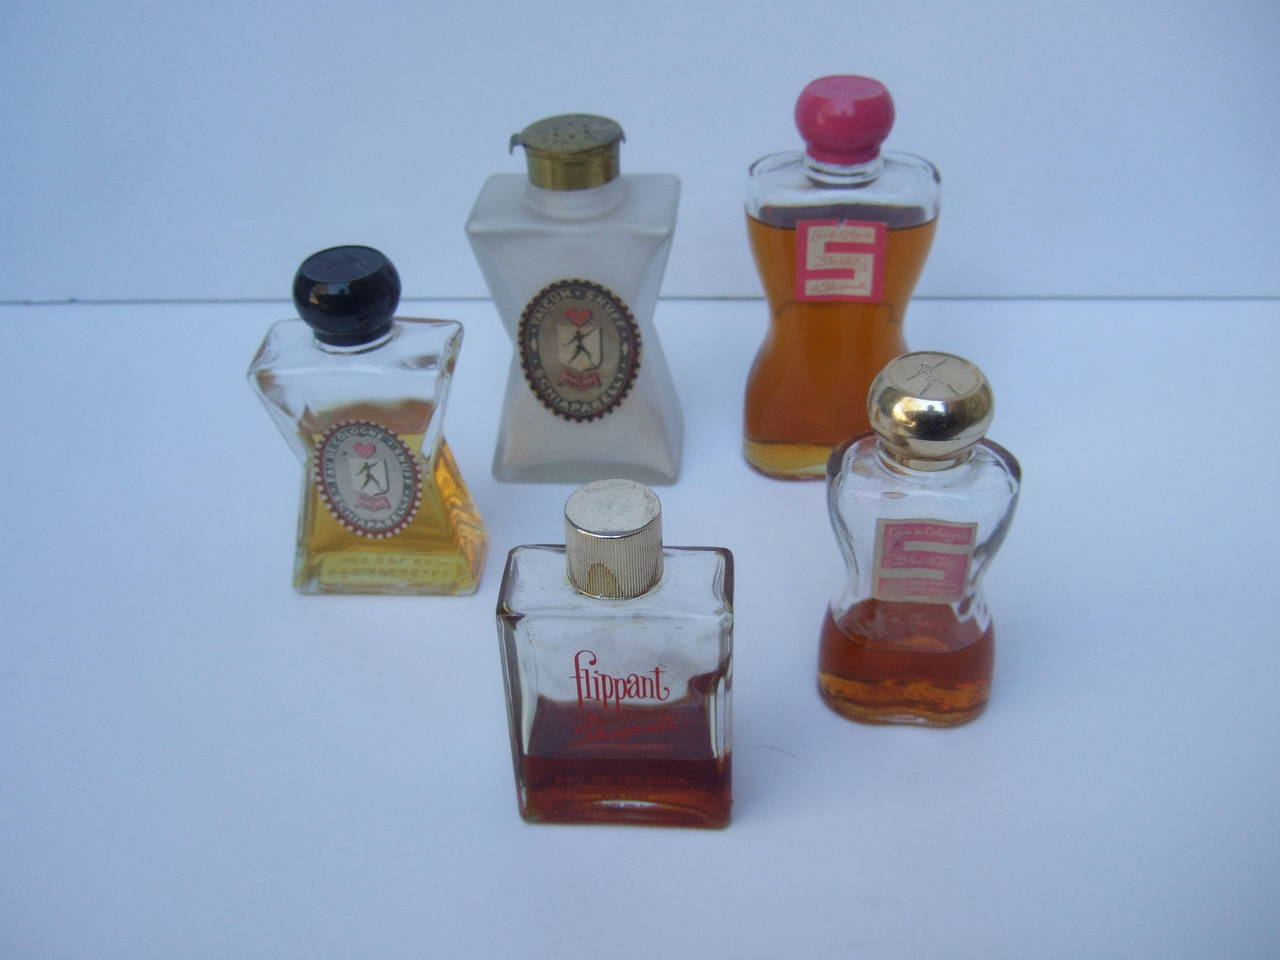 Collection of vintage Schiaparelli perfume bottles c 1950s
The assortment of vintage perfume bottles varies in fragrance & bottle size
The largest Schiaparelli Shocking bottle is a 4 oz crystal torso bottle that is paired with a fuchsia pink satin